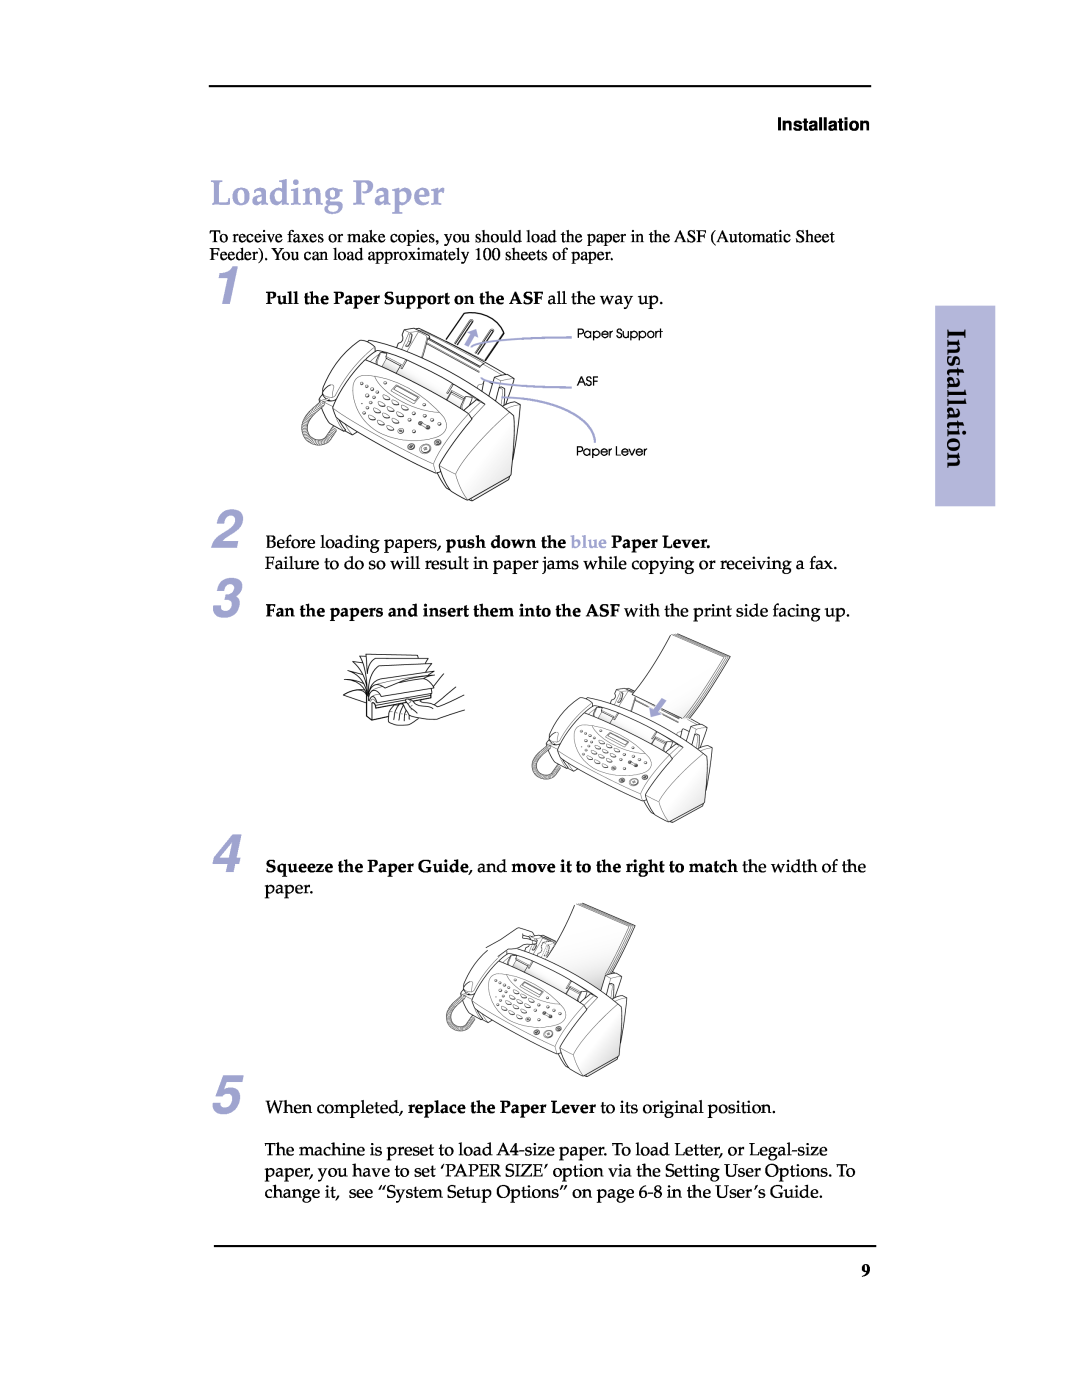 Samsung SF-3100 manual Loading Paper, Pull the Paper Support on the ASF all the way up, Installation 